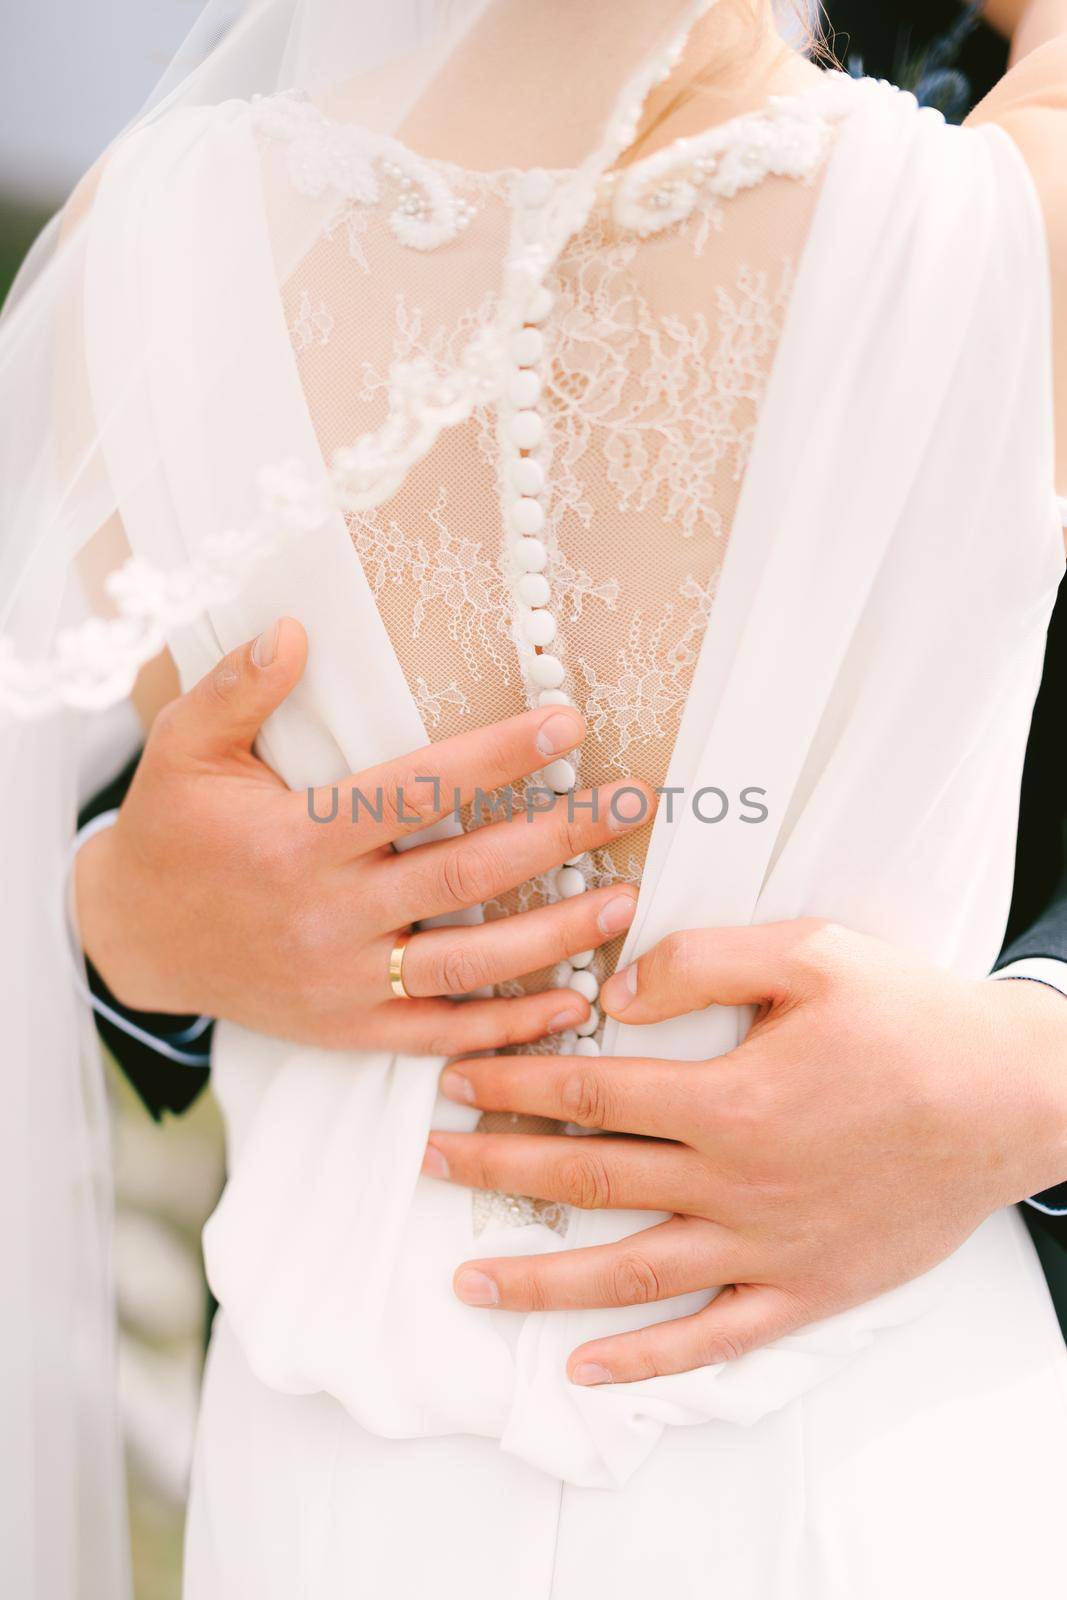 Hands of the groom hug the waist of the bride in a white lace dress. Close-up. Back view by Nadtochiy